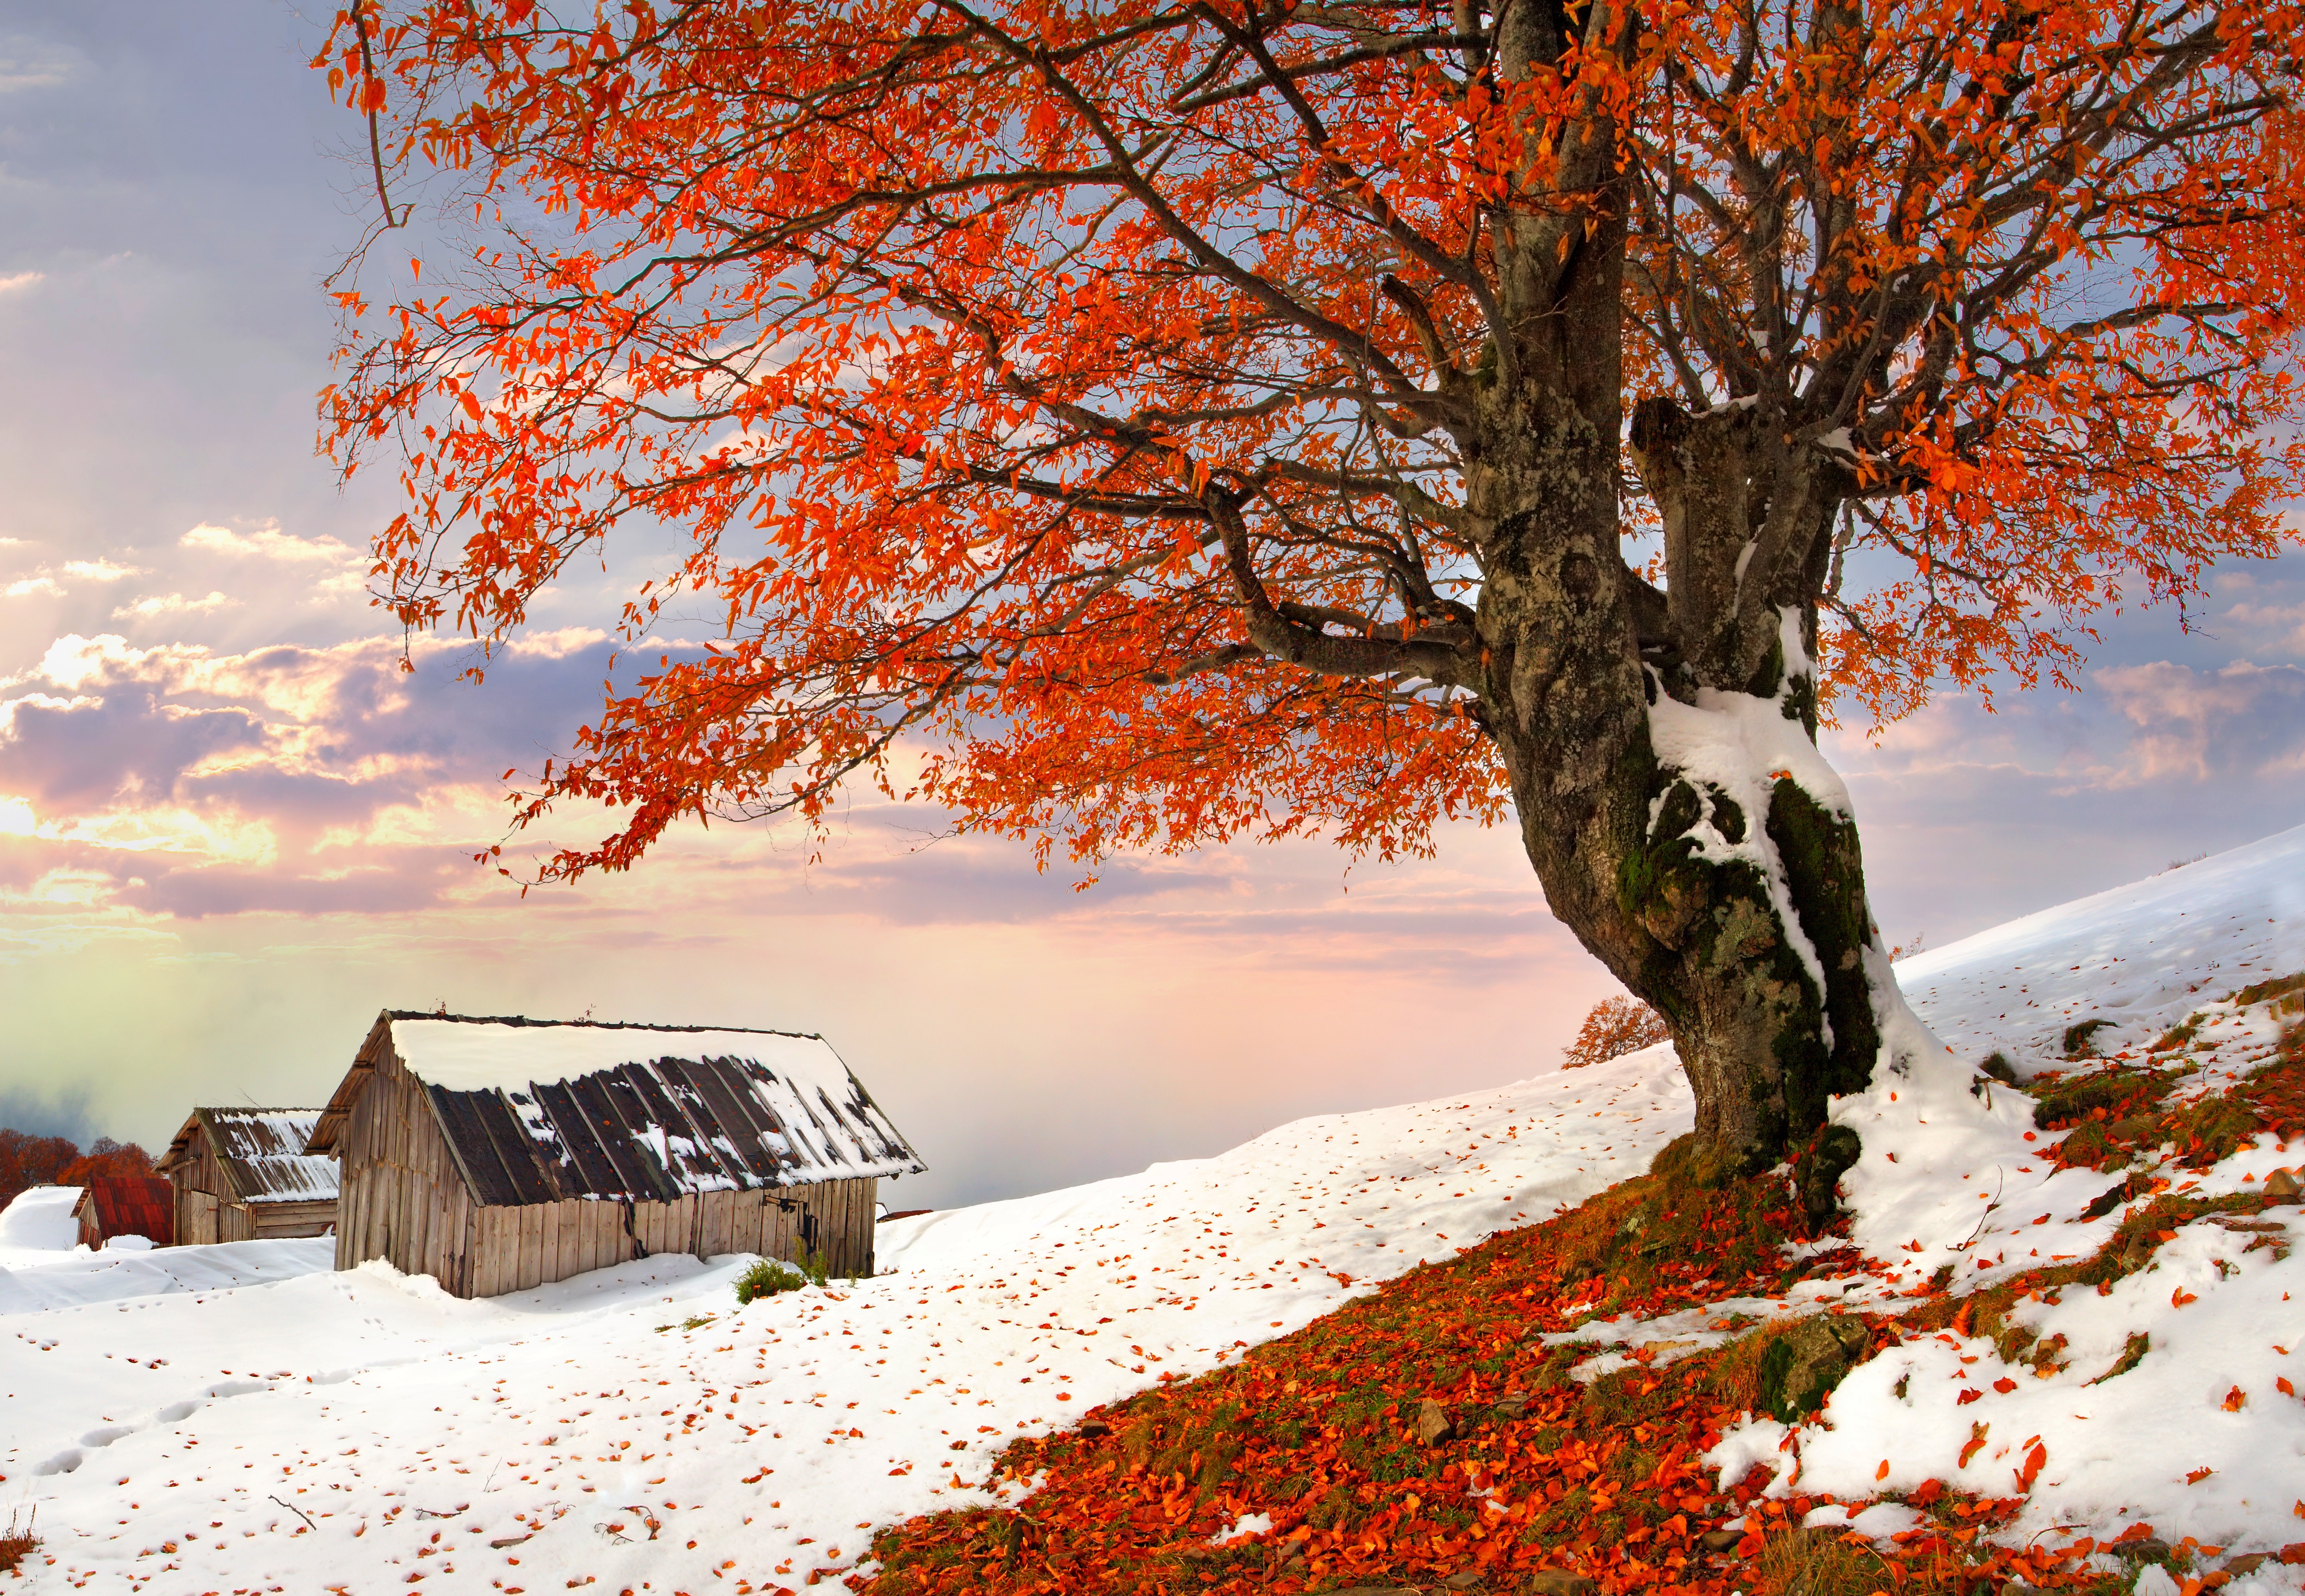 Autumn and winter together / 5770 x 3995 / Other / Photography ...